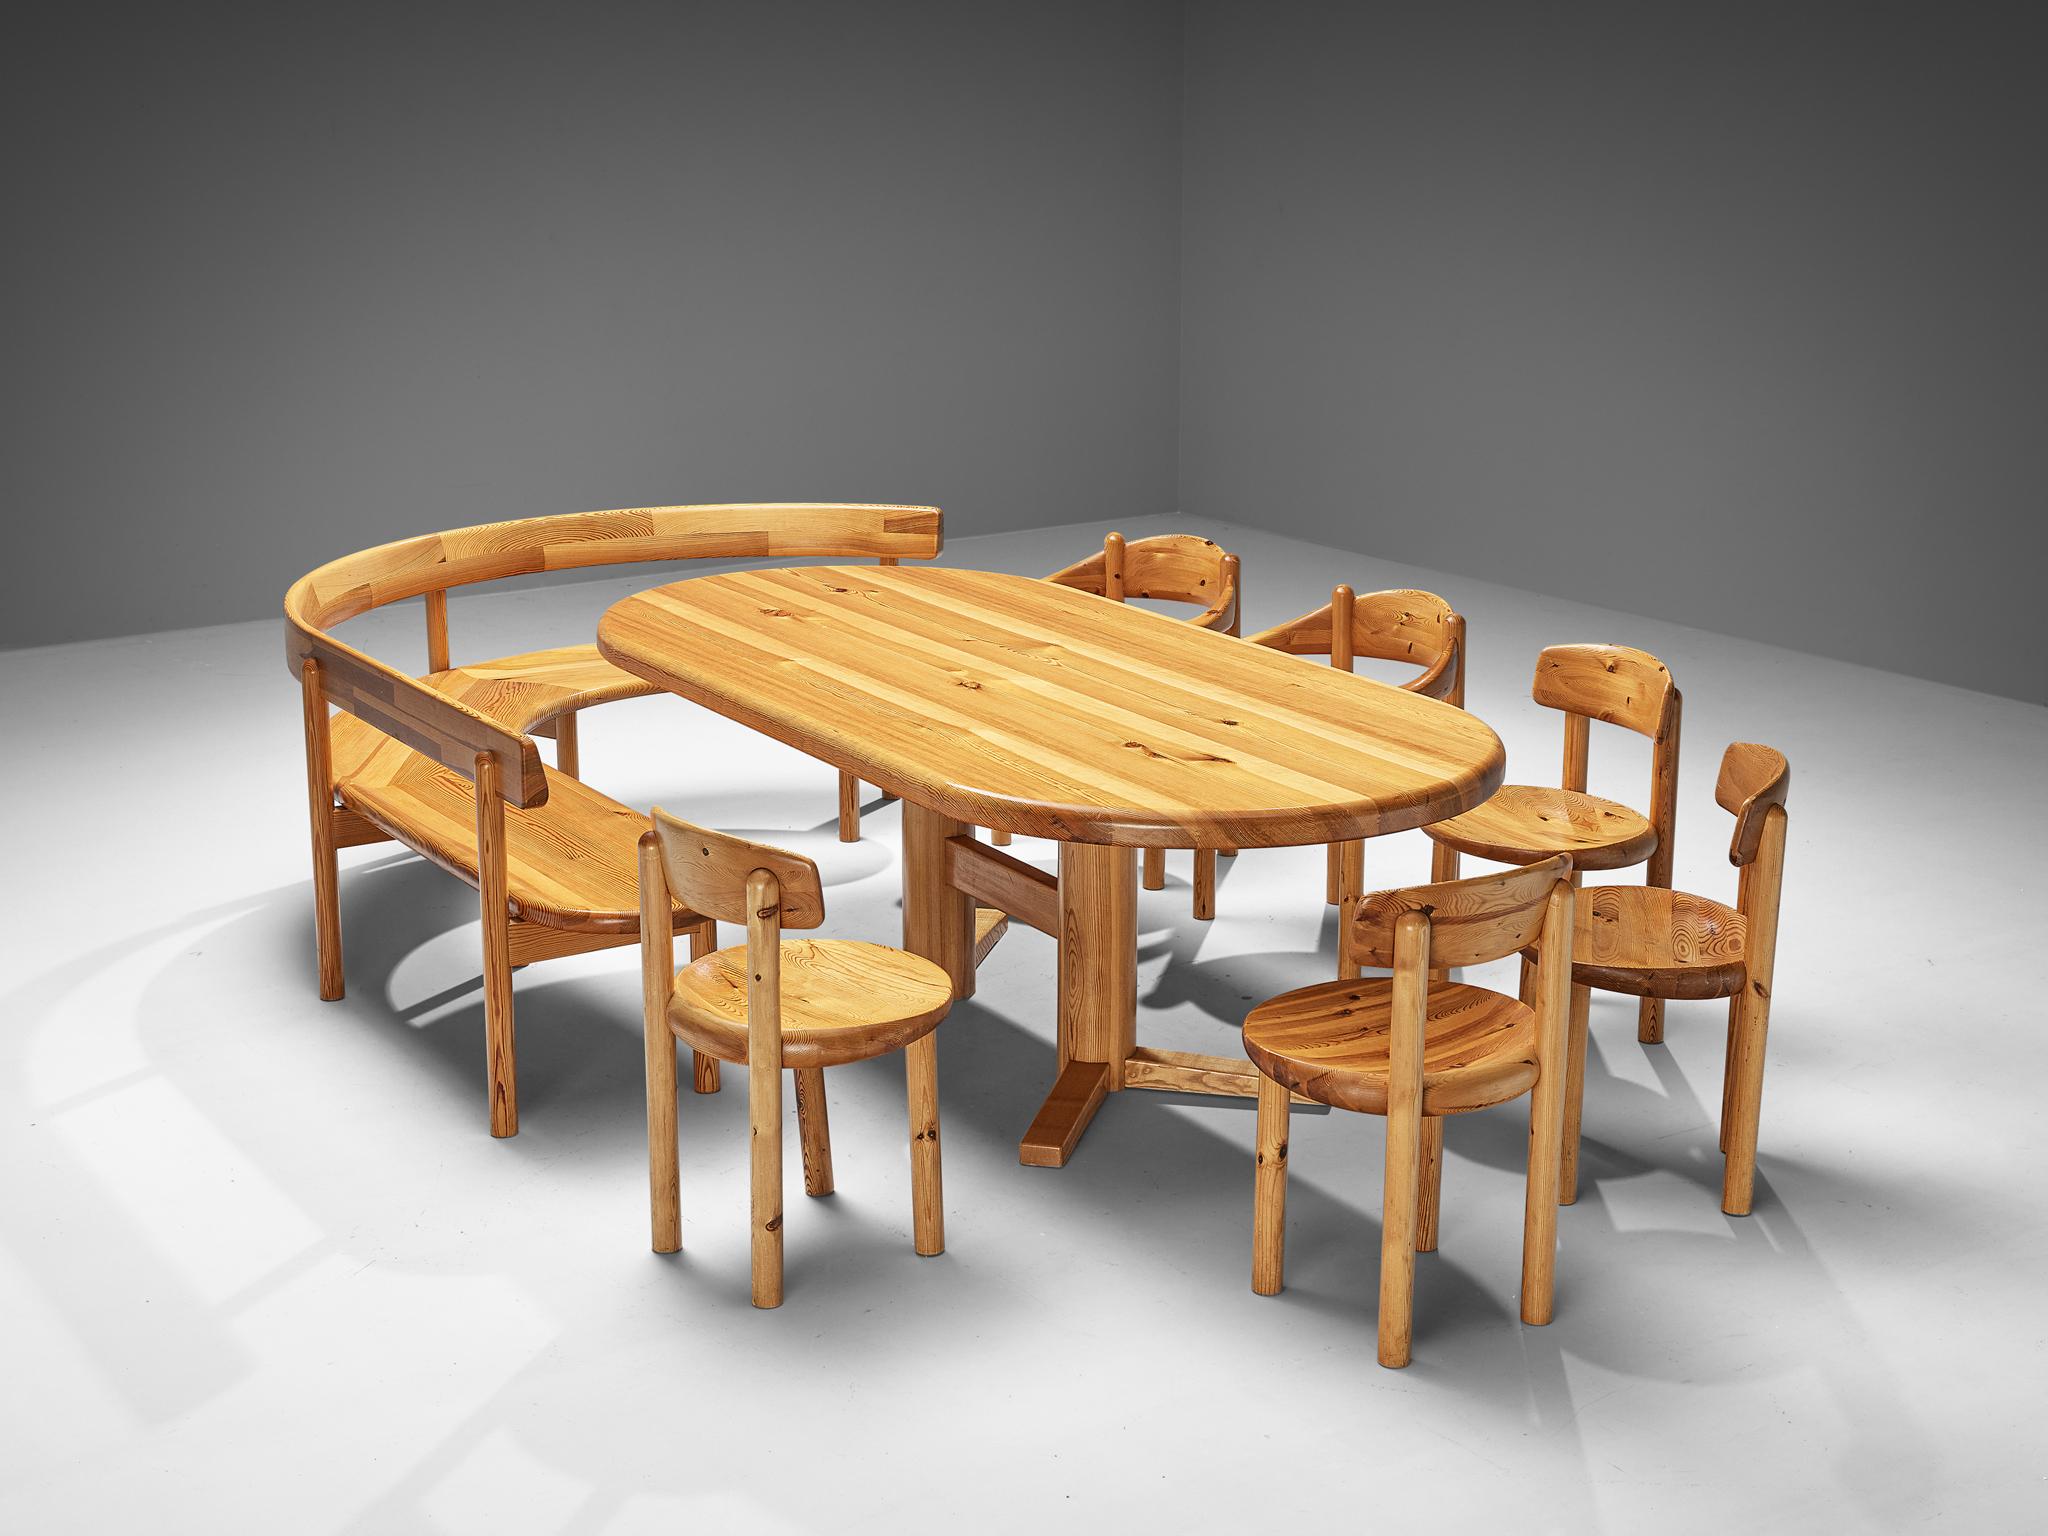 Rainer Daumiller, dining room set consisting of a table, bench, chairs and armchairs, solid pine, Denmark, 1970s

Rainer Daumiller's expansive dining room set is a rare find, distinguished by its exceptional attention to detail, material use, and